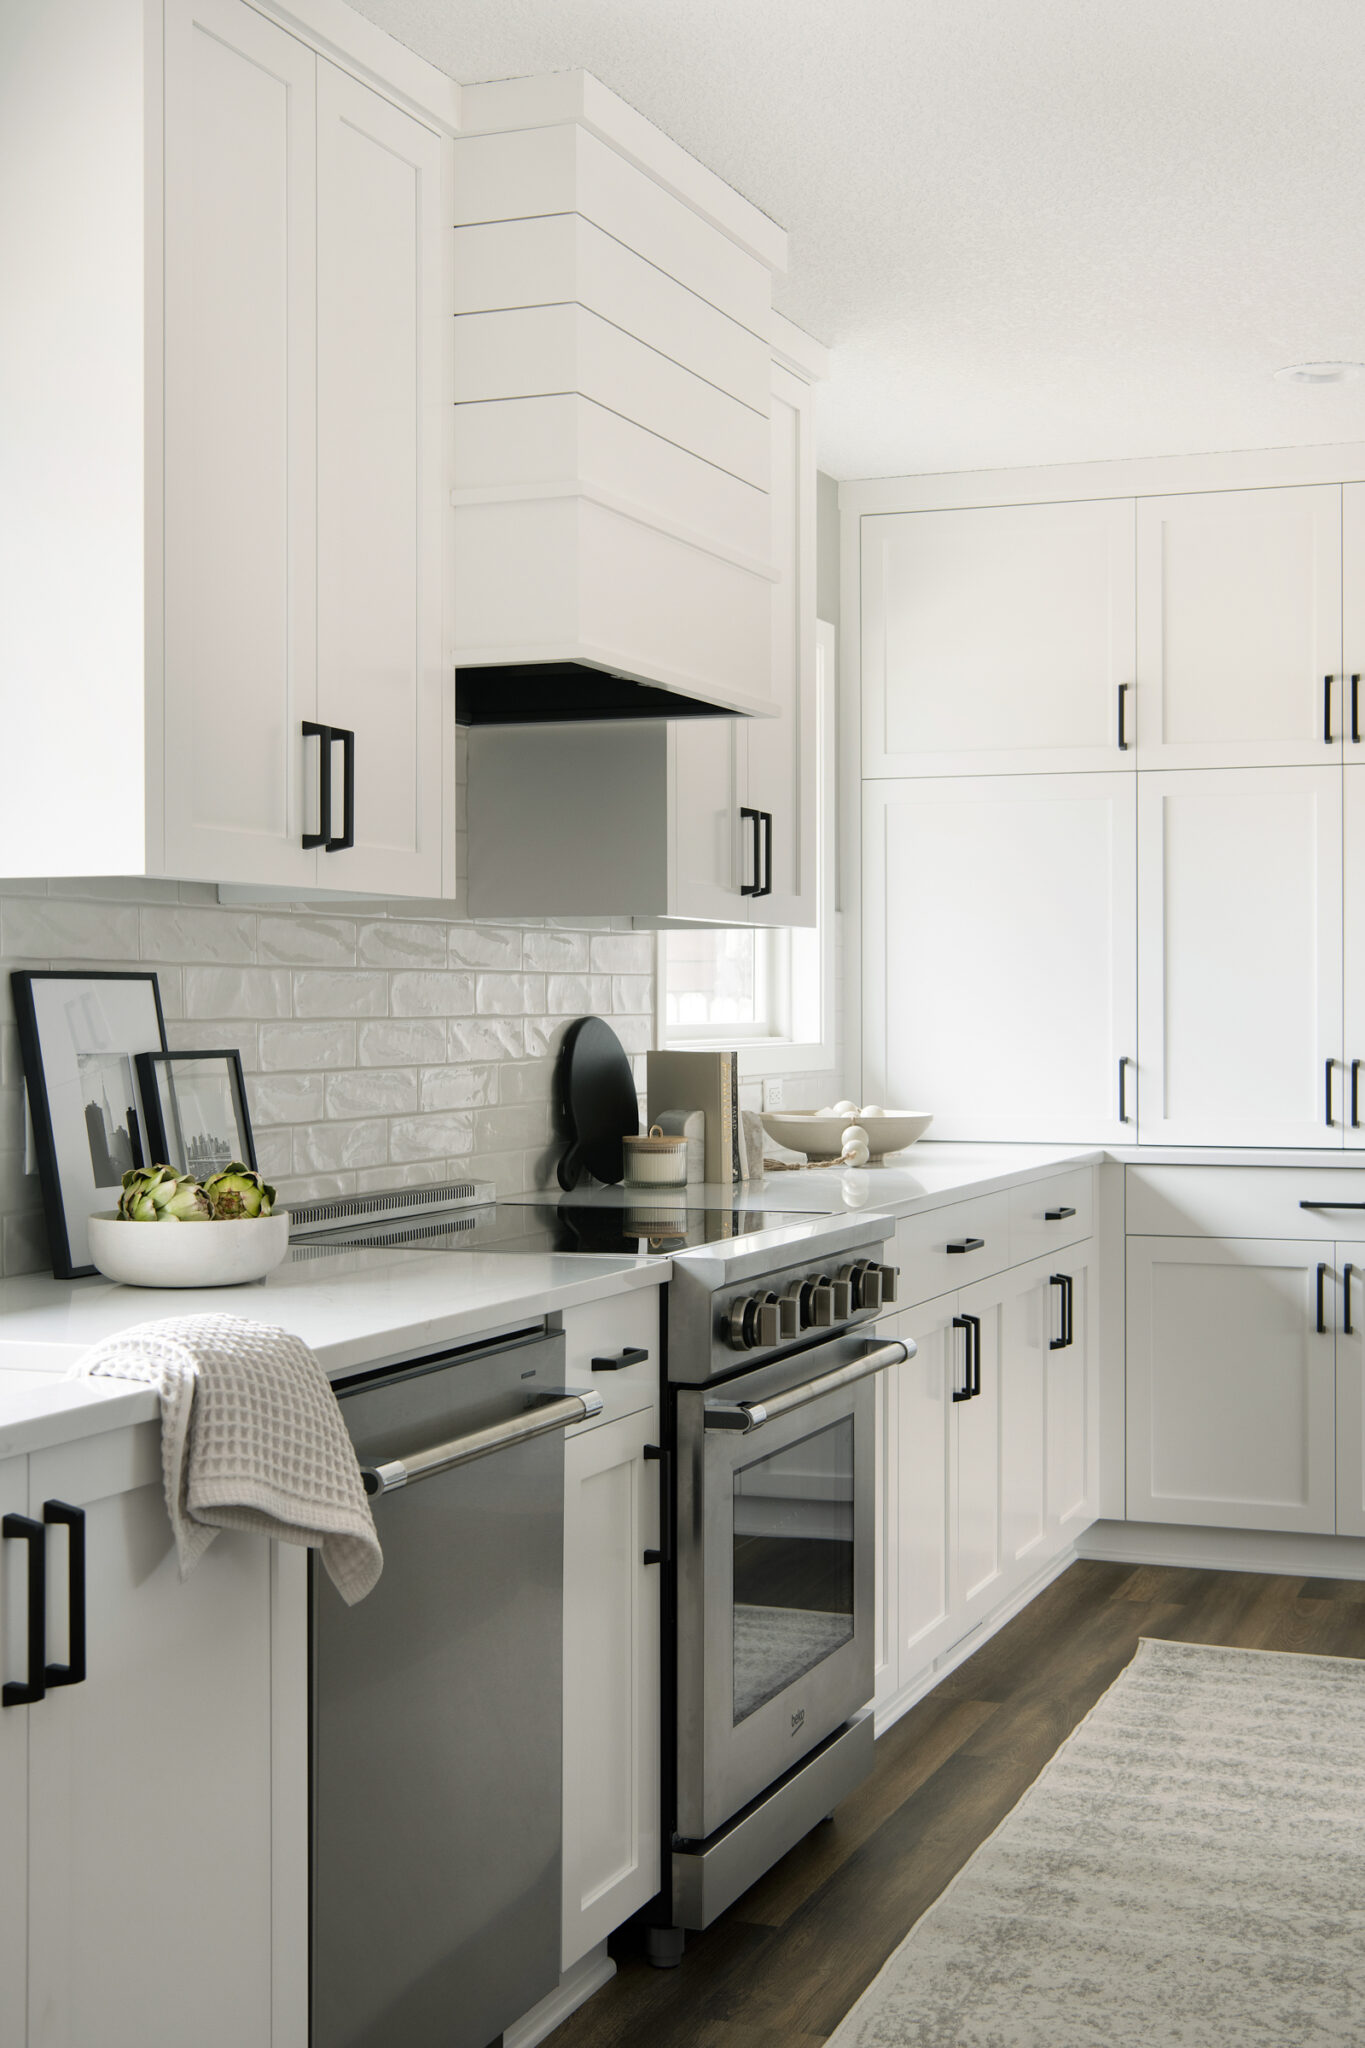 Newly remodeled white kitchen with black accents and appliances